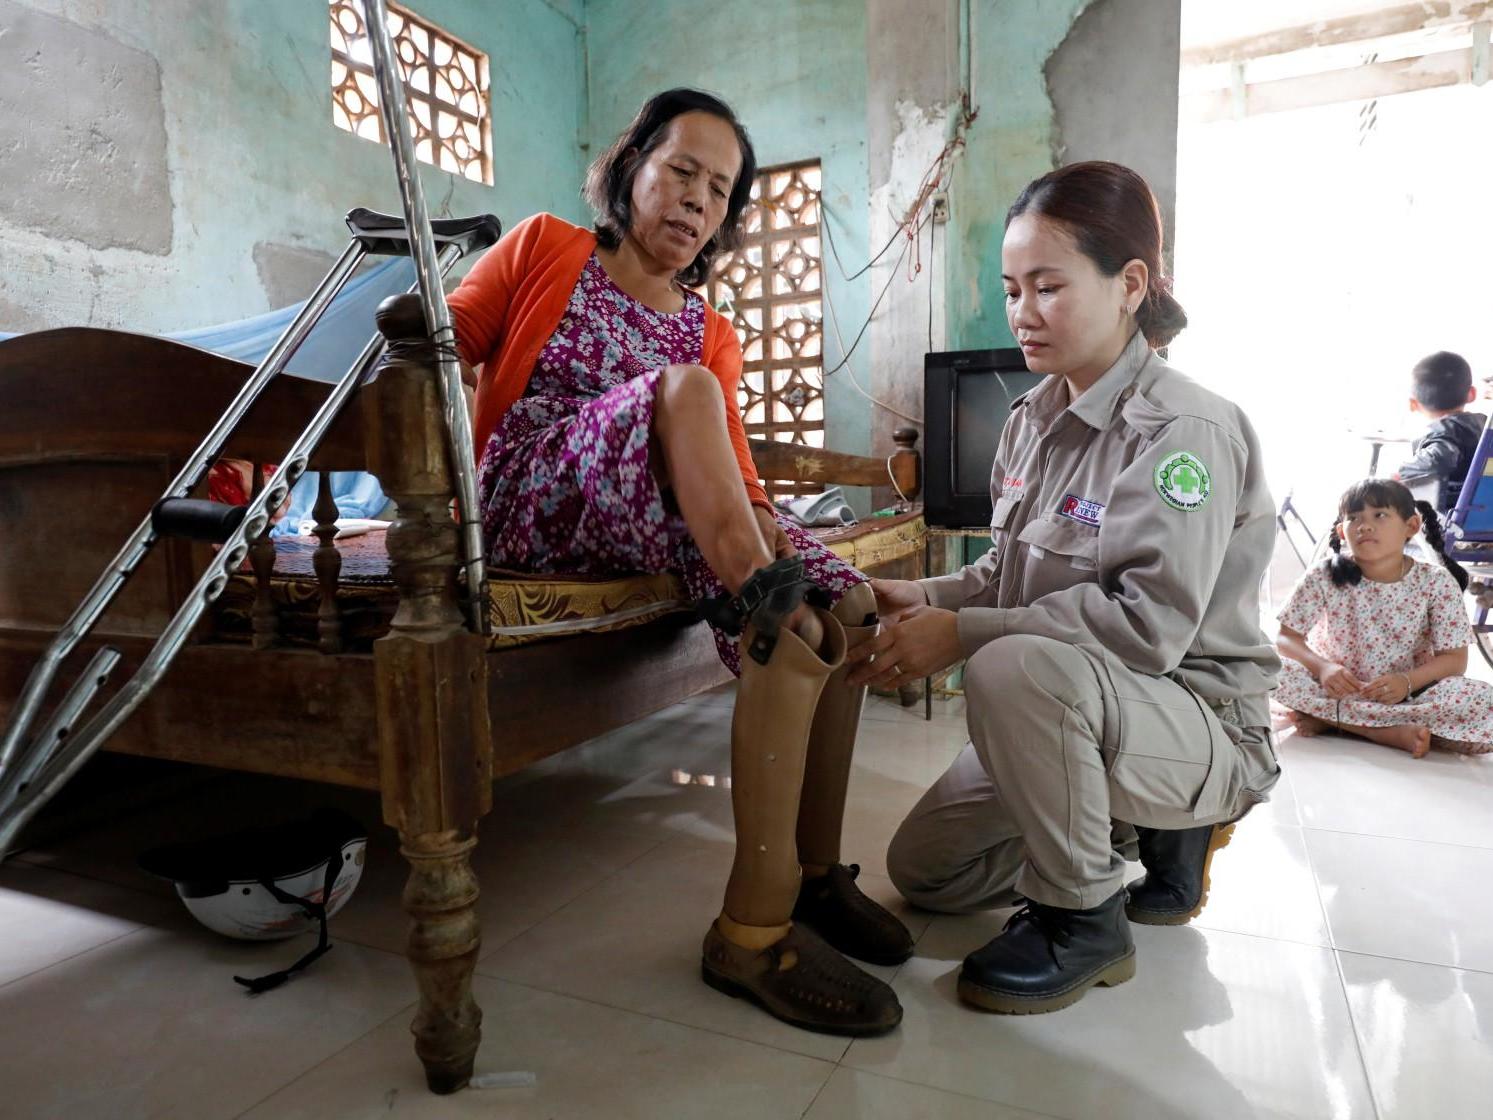 Hoang Thi Hoa, who lost both legs and an arm due to unexploded ordnance during the Vietnam War, is assisted by her daughter Nguyen Thi Ha Lan at their house in Quang Tri province, Vietnam on 4 March 2020